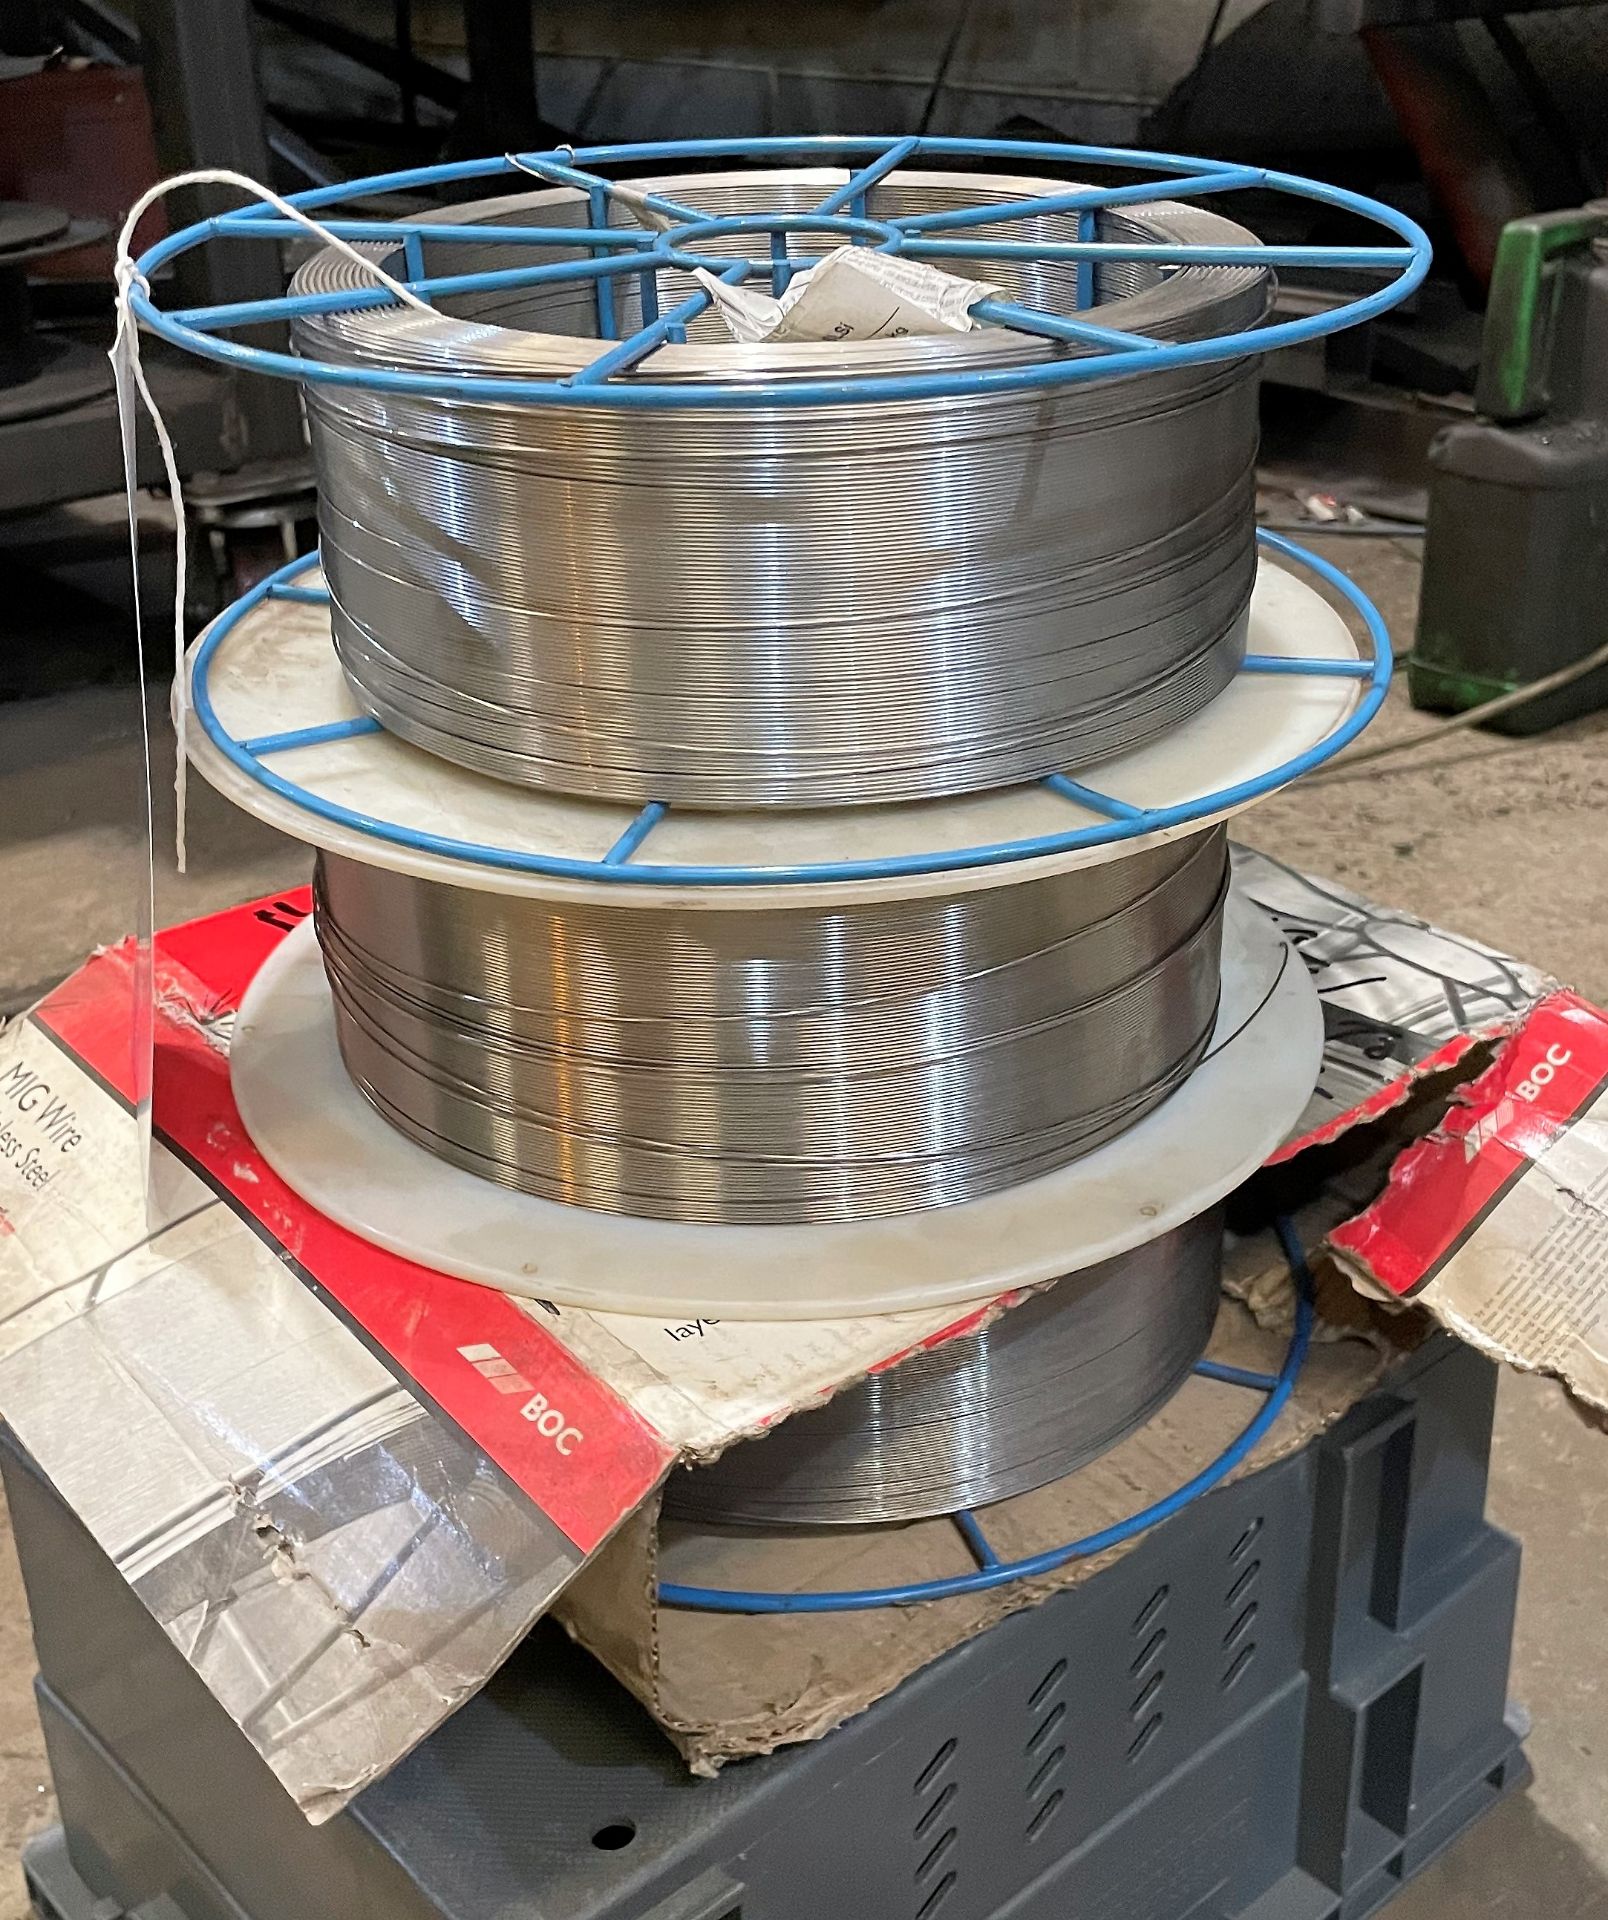 3 Coils of Stainless Steel Welding Wire.